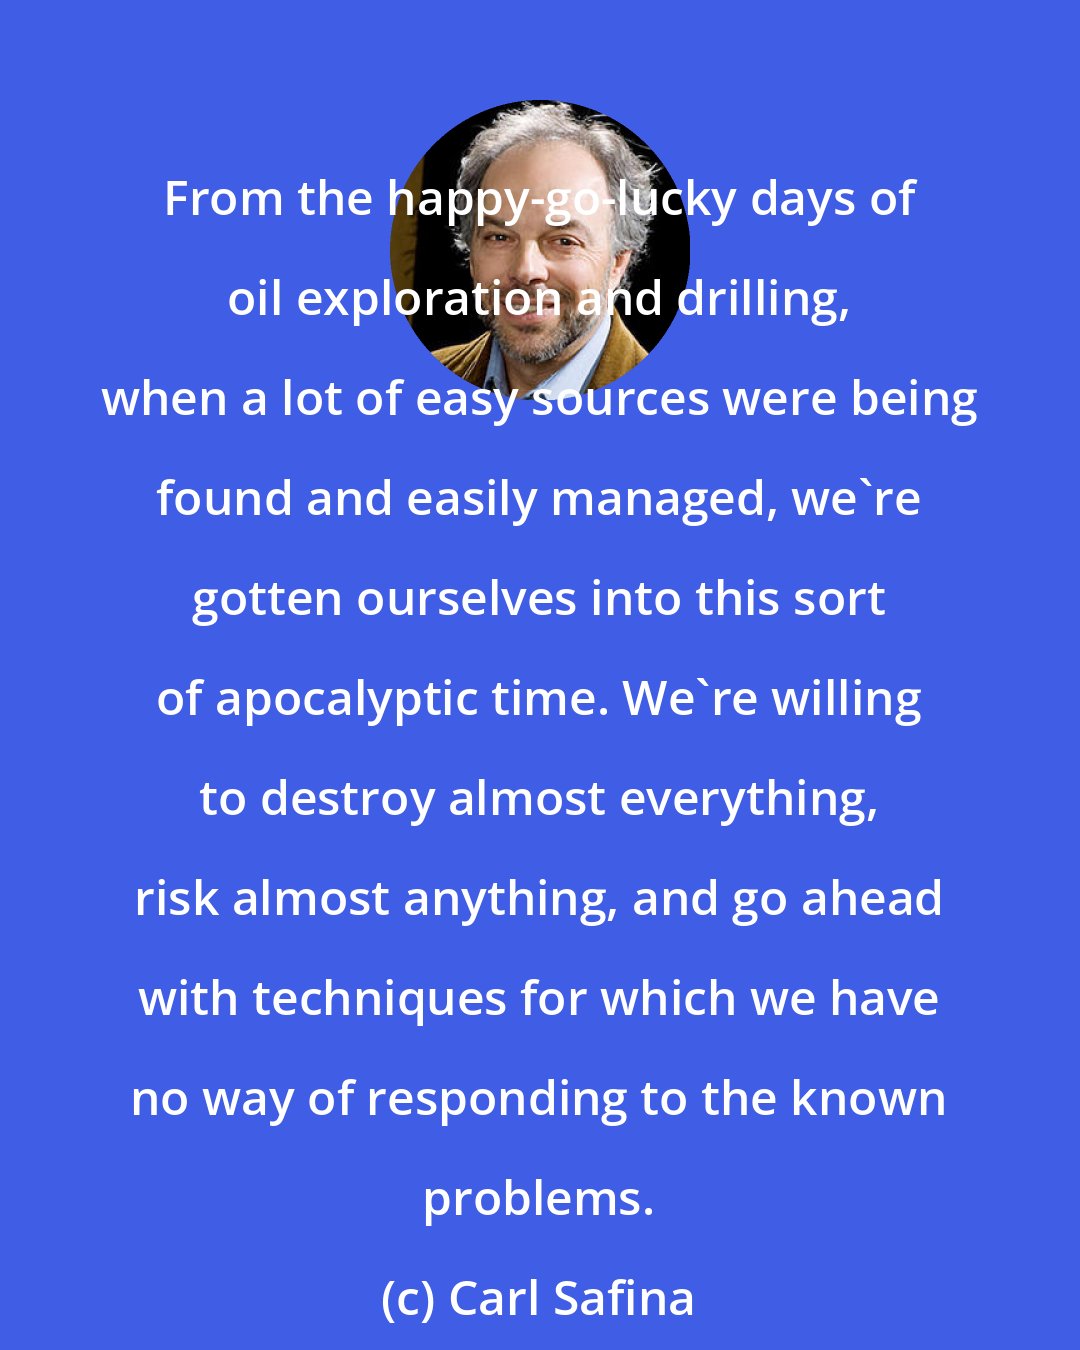 Carl Safina: From the happy-go-lucky days of oil exploration and drilling, when a lot of easy sources were being found and easily managed, we're gotten ourselves into this sort of apocalyptic time. We're willing to destroy almost everything, risk almost anything, and go ahead with techniques for which we have no way of responding to the known problems.